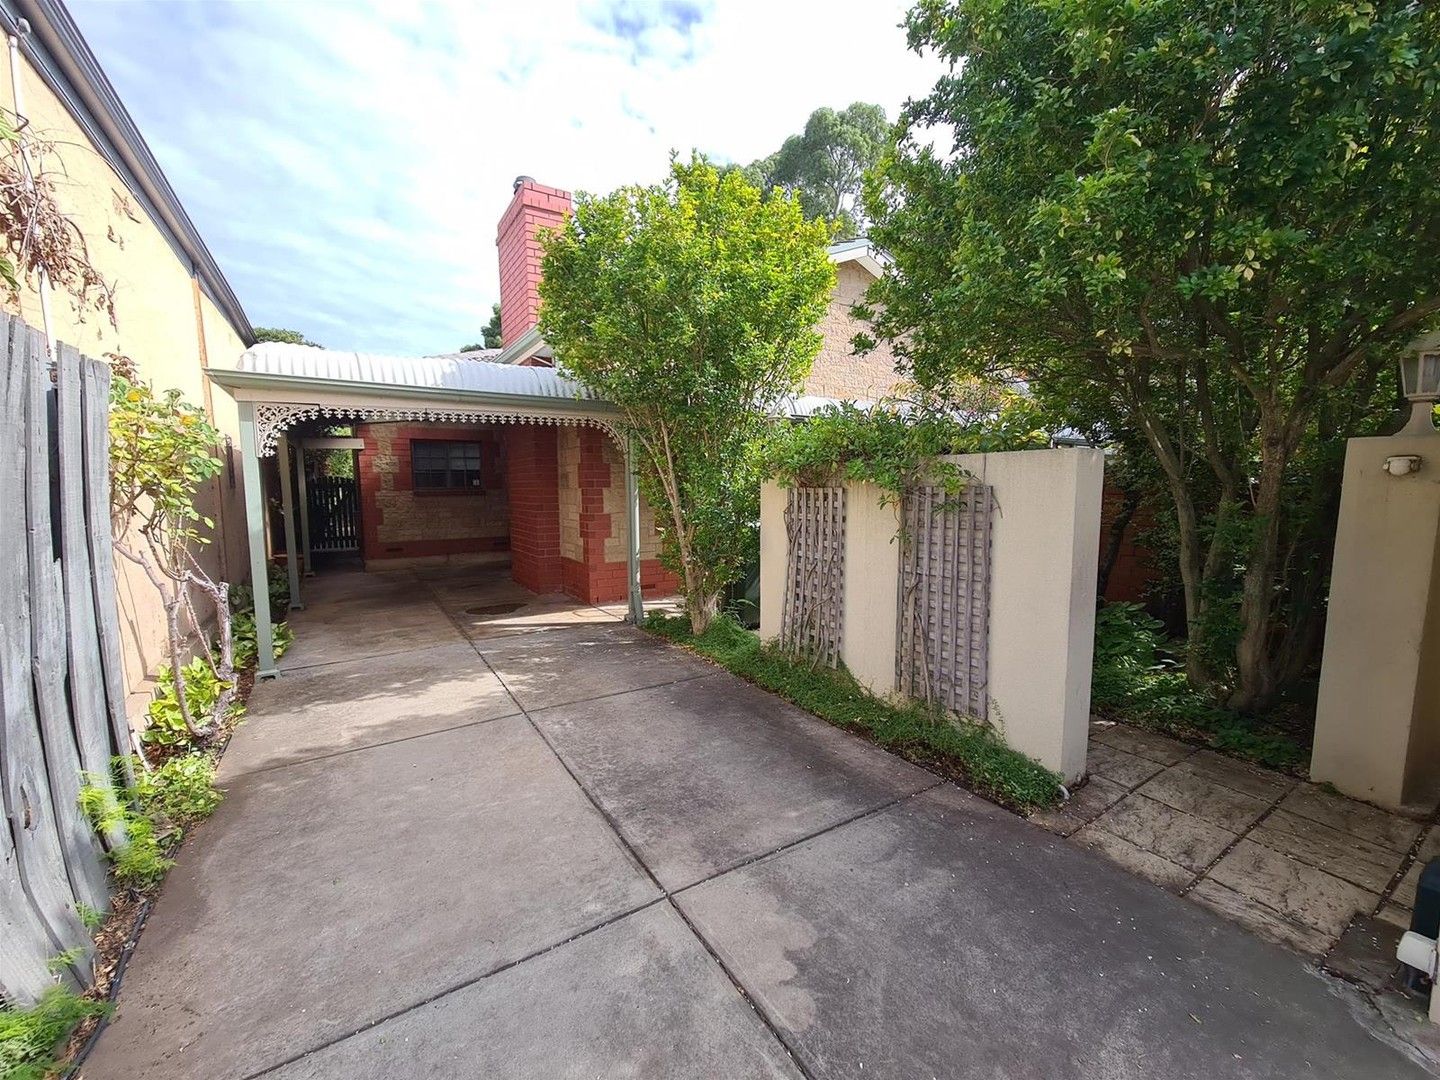 2 bedrooms House in 24b George Street PARKSIDE SA, 5063